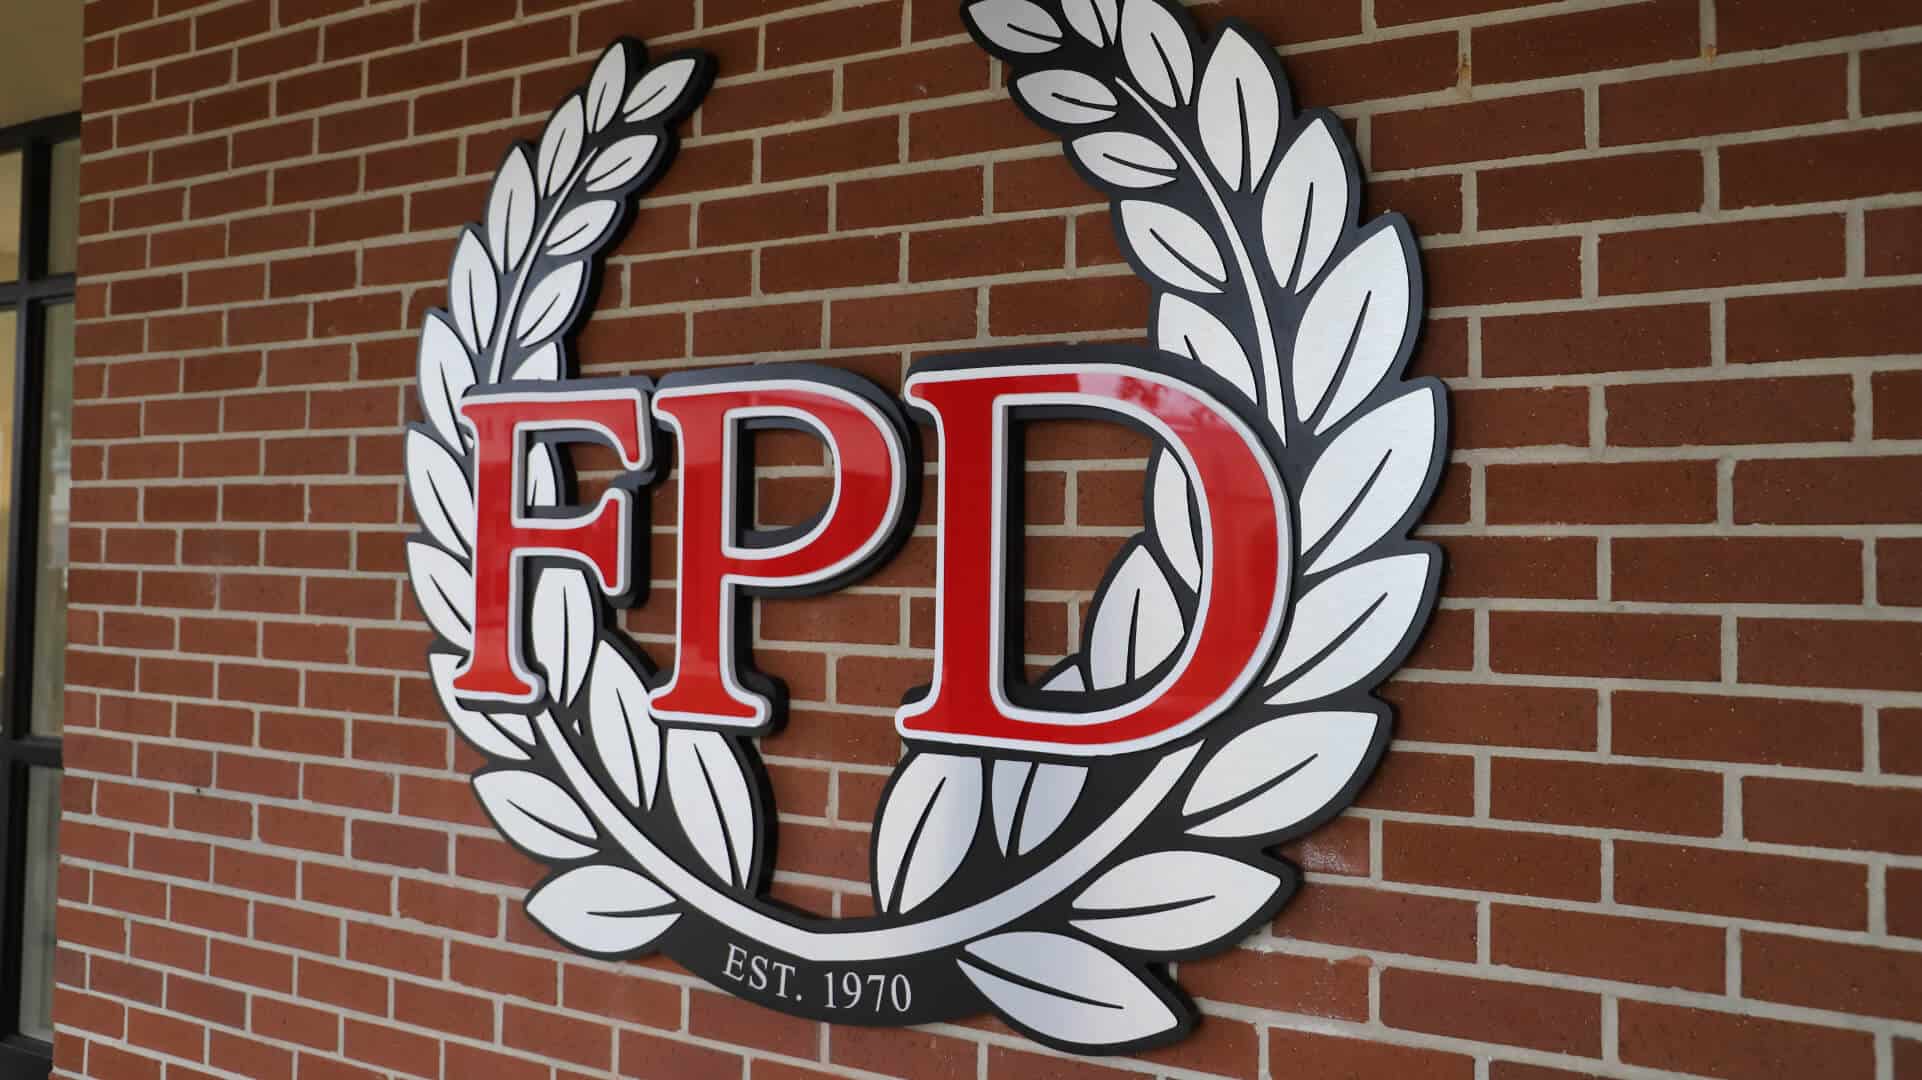 FPD logo on wall